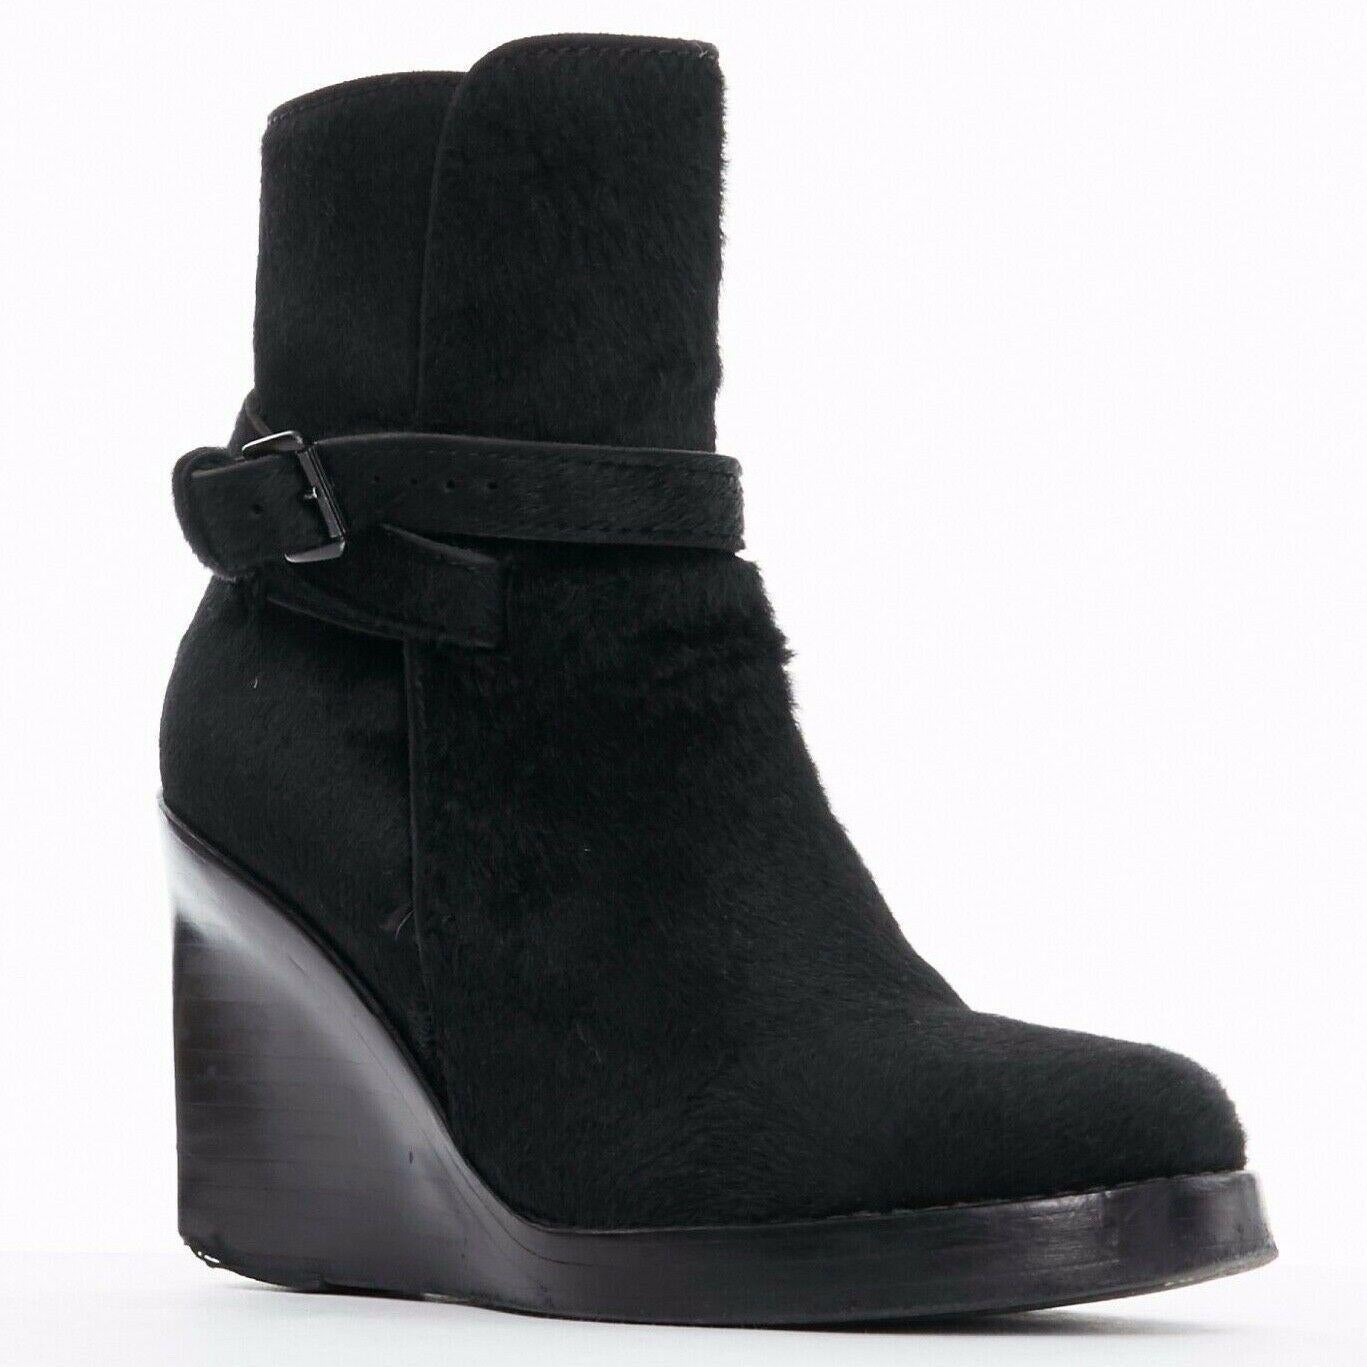 ANN DEMEULEMEESTER pony skin belted platform ankle boots shoes EU36 US6 UK3

ANN DEMEULEMEESTER Black pony skin . Wrap around ankle strap with buckle secure . Stacked wooden wedge heel

CONDITION
Very good, minor chip on heel.

MEASUREMENTS
Length: